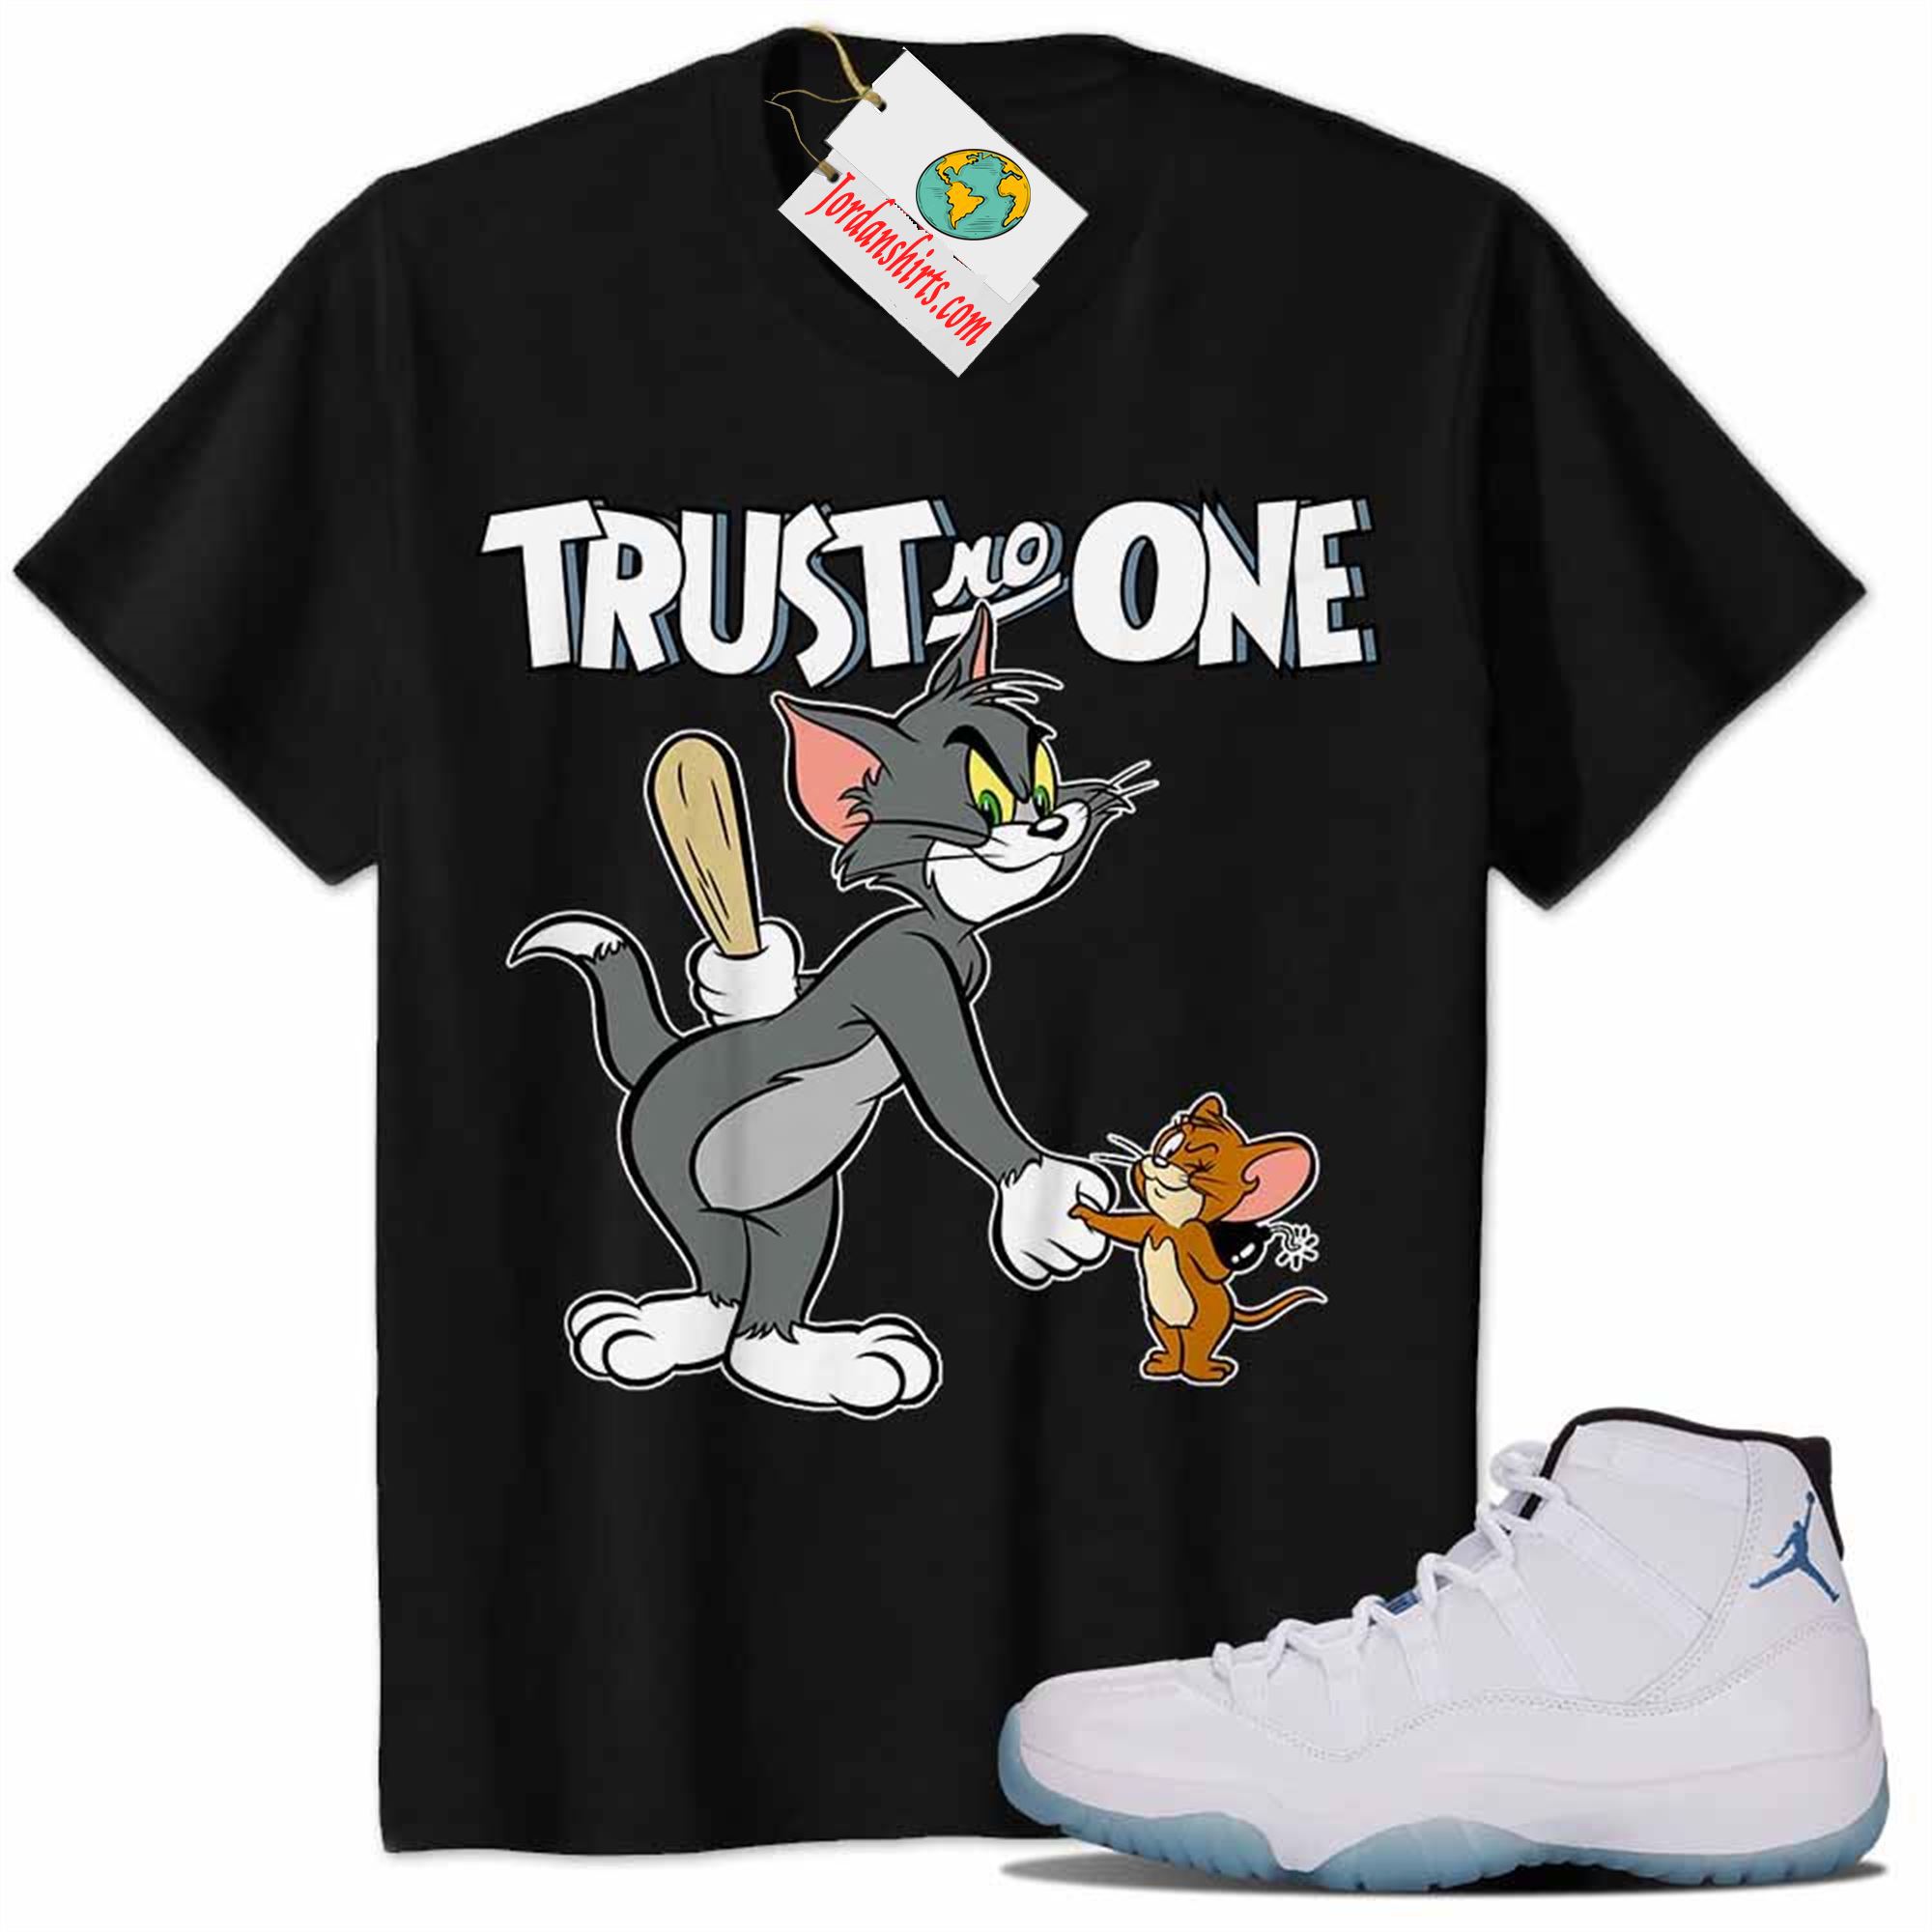 Jordan 11 Shirt, Tom And Jerry Trust No One With Bomb Black Air Jordan 11 Legend Blue 11s Plus Size Up To 5xl